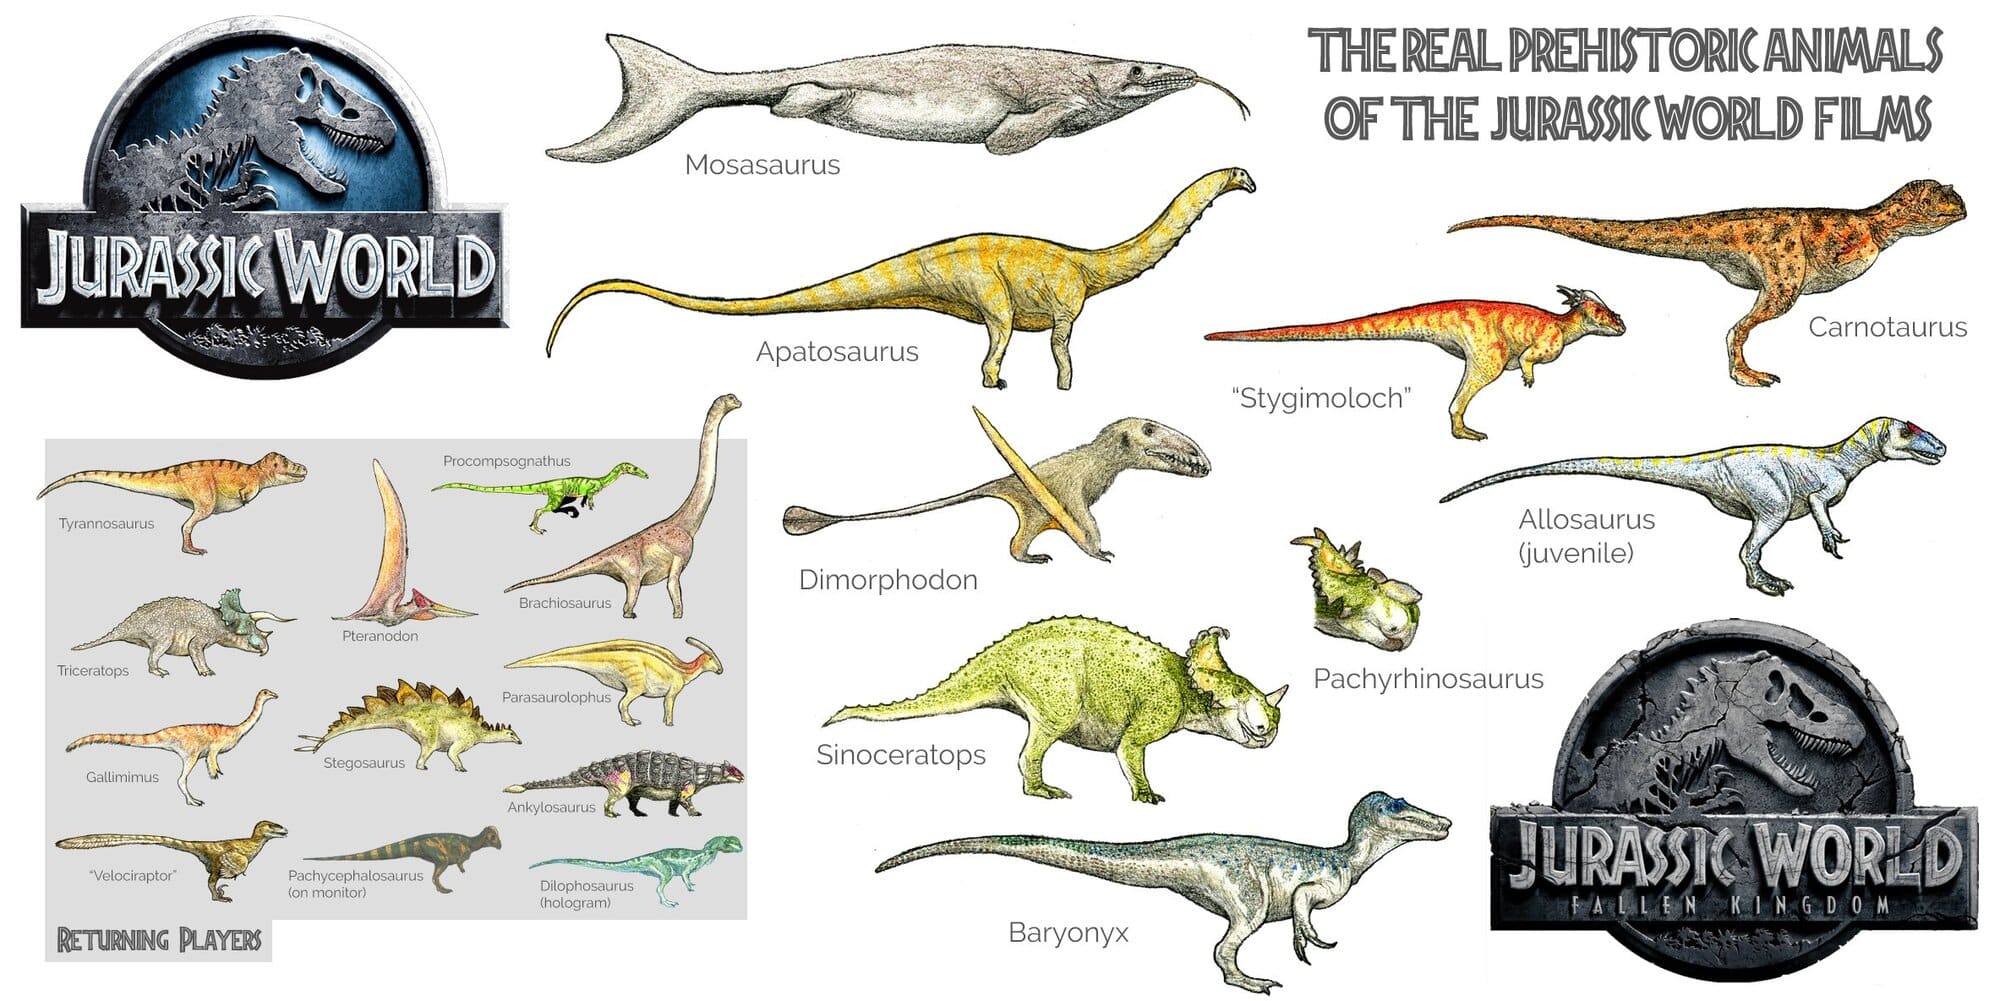 The Dinosaurs of the Jurassic World movies